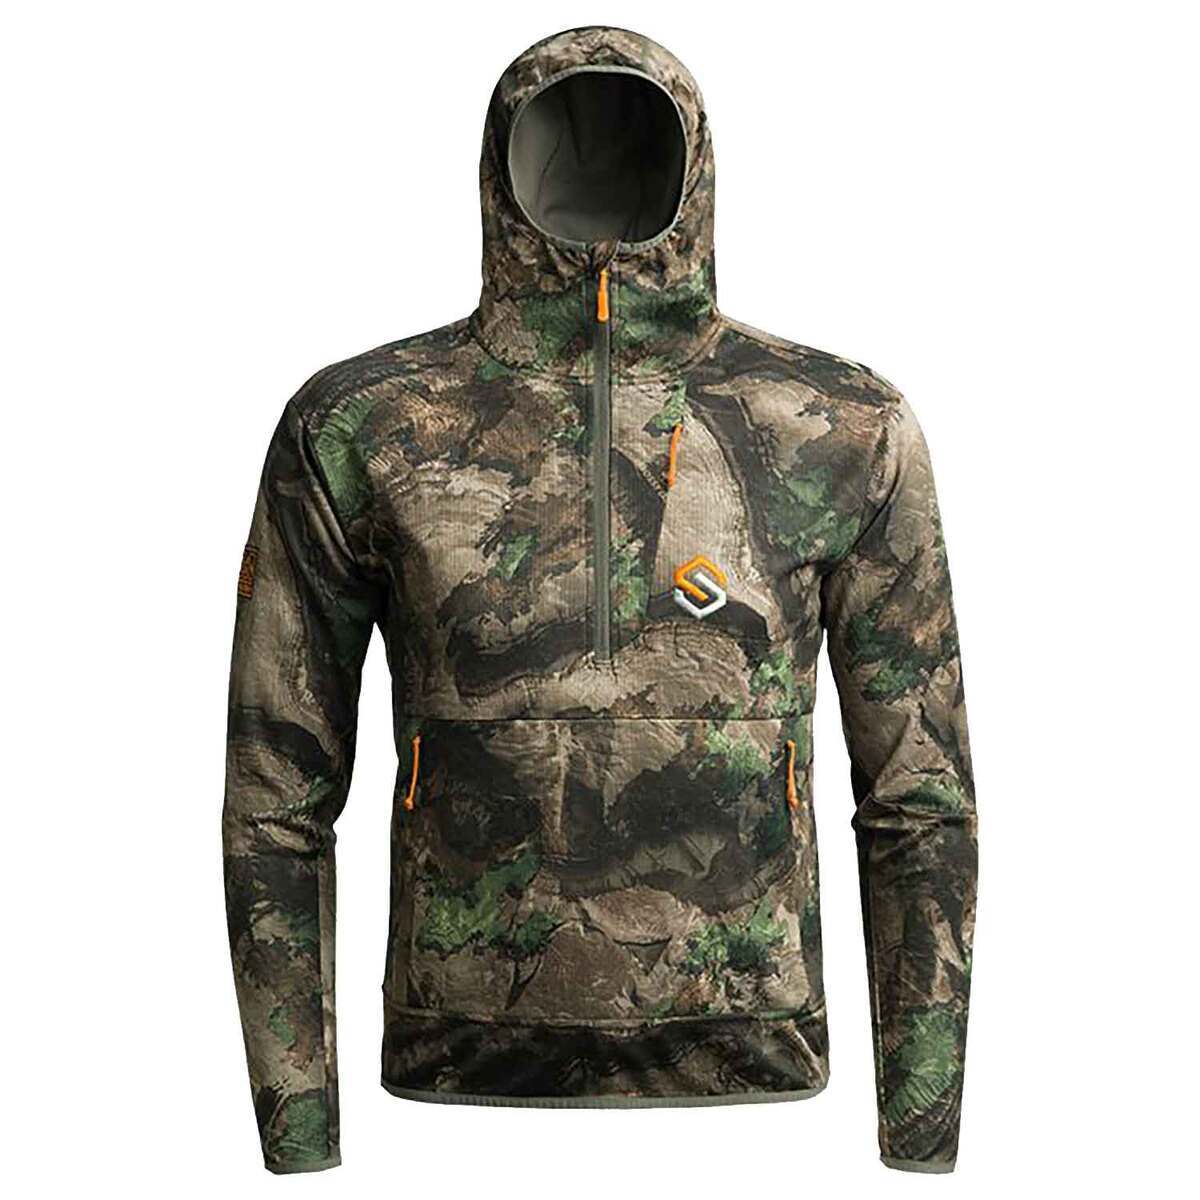 Mossy Oak Men's Country DNA Mid-Length Insulated Hunting Bomber Jacket - S-3xl Each